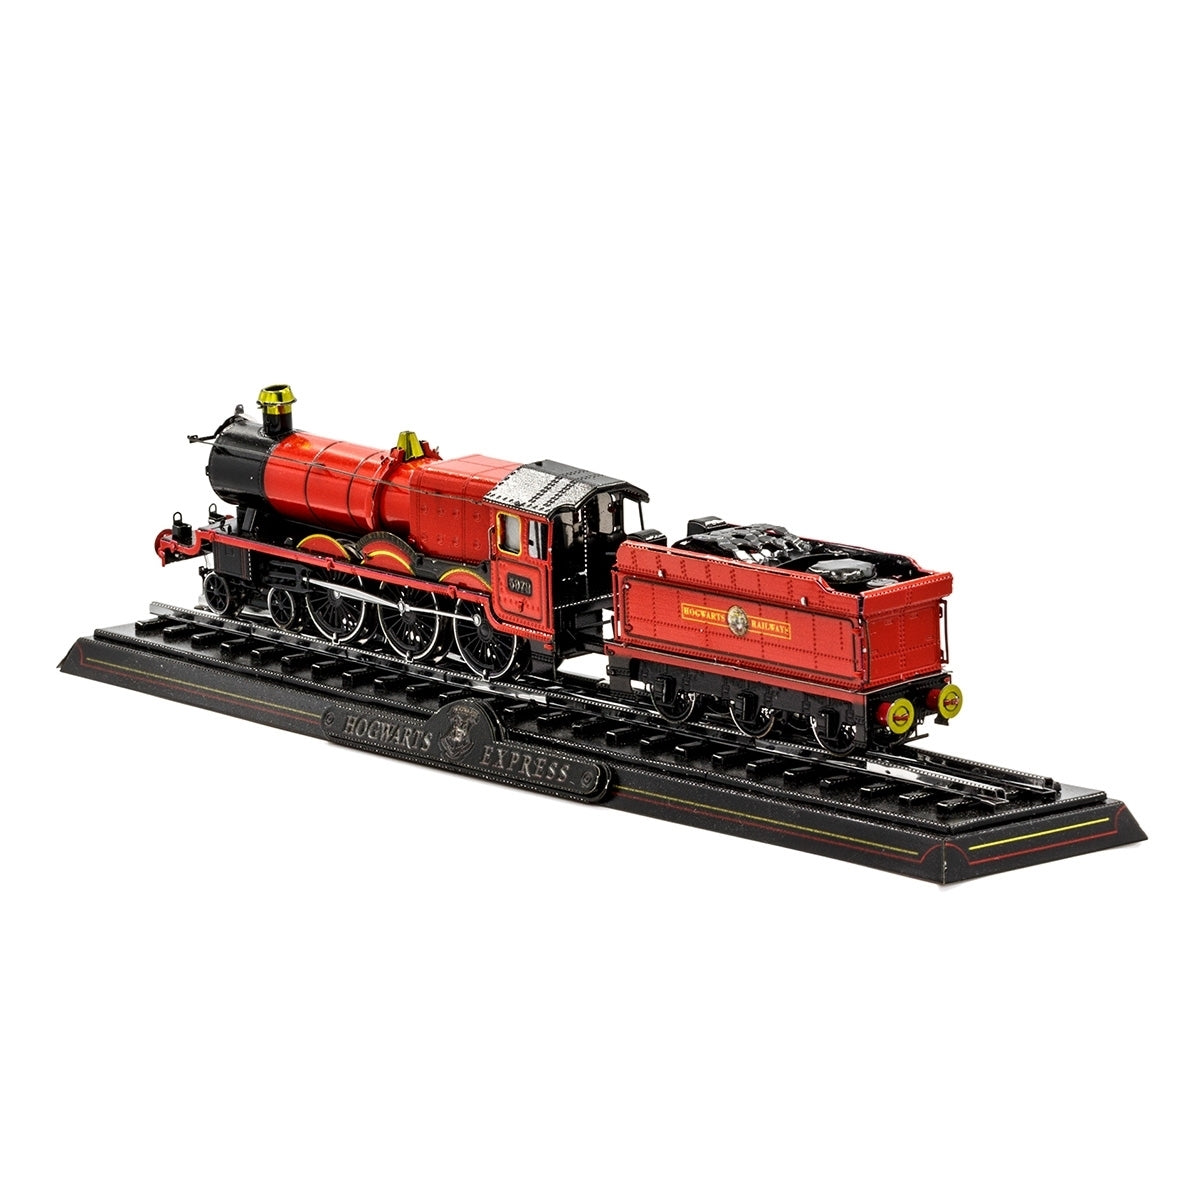 Hogwarts Express With Track - 3D Model Kit by Metal Earth gift puzzle puzzle